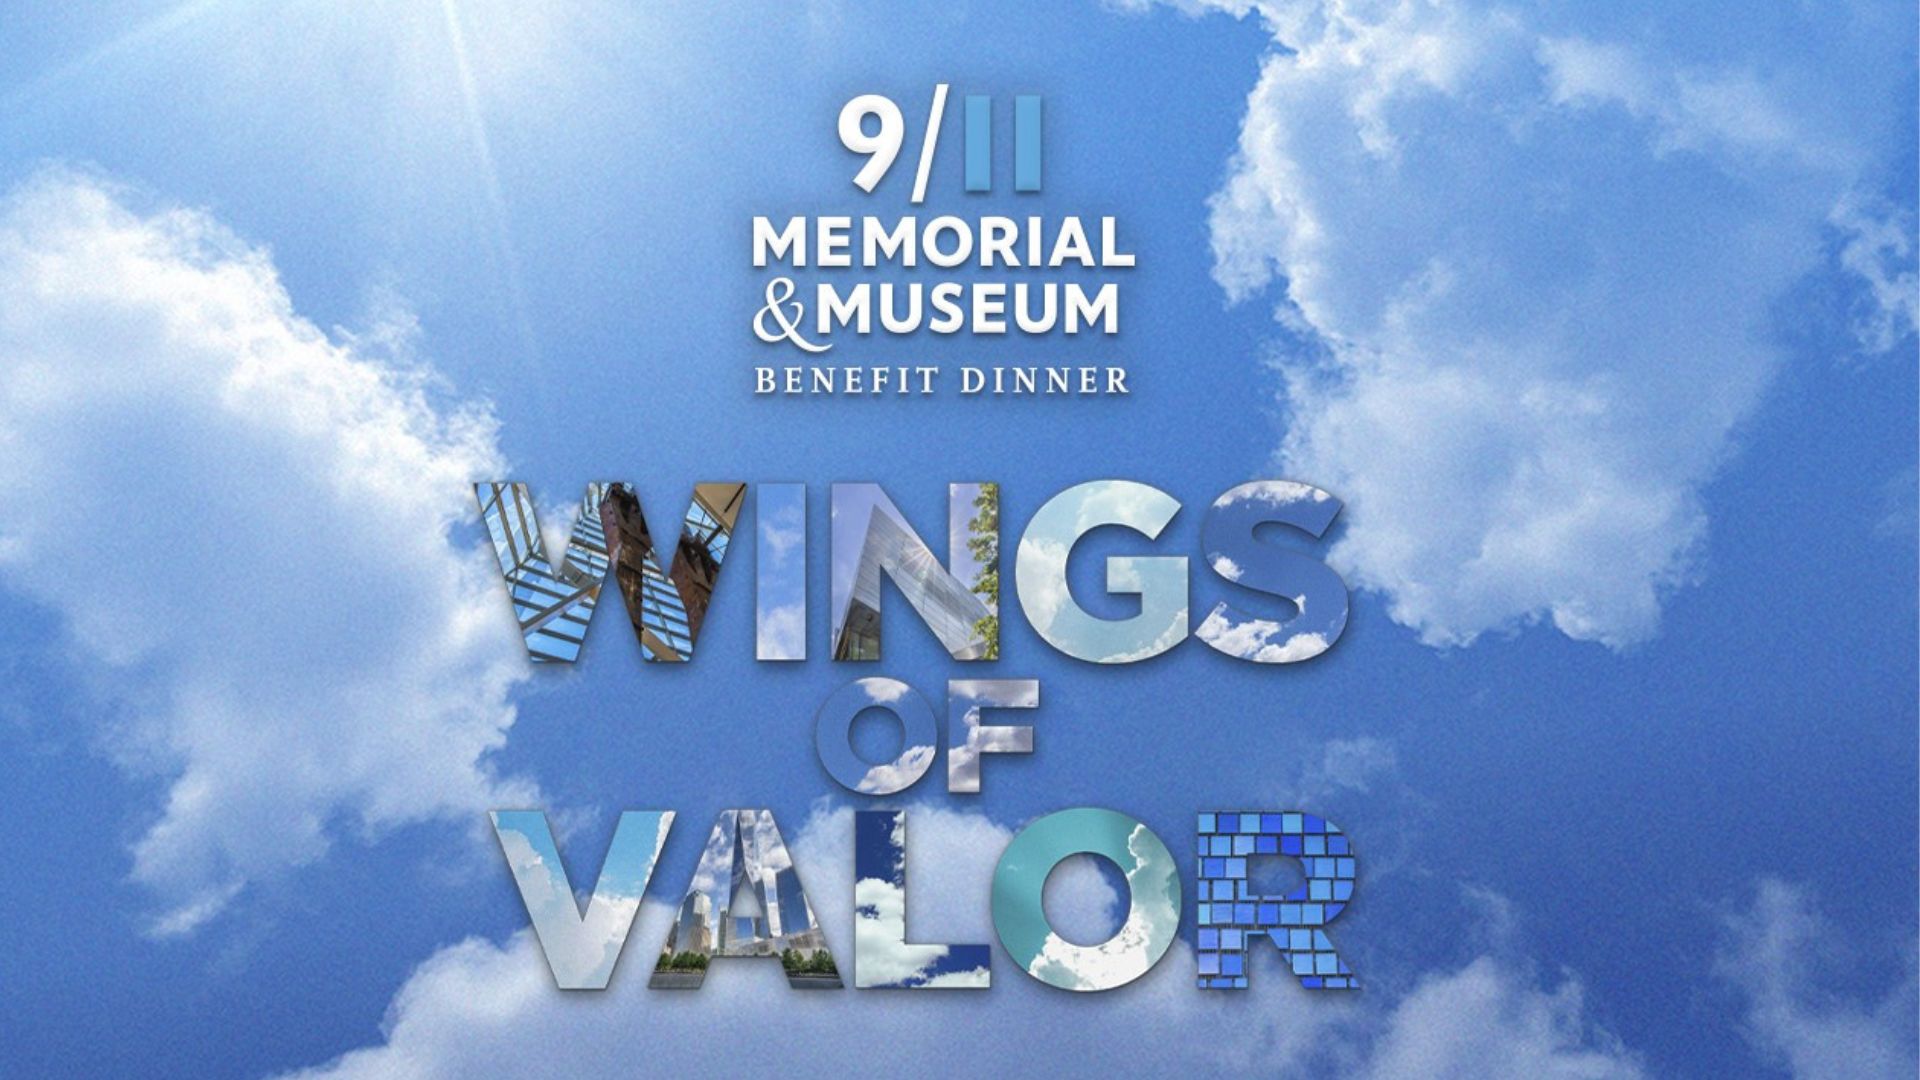 The 9/11 Memorial & Museum logo is set against a blue sky populated with white clouds. Underneath the logo, text reads Wings of Valor, and those letters are comprised of small photographs.